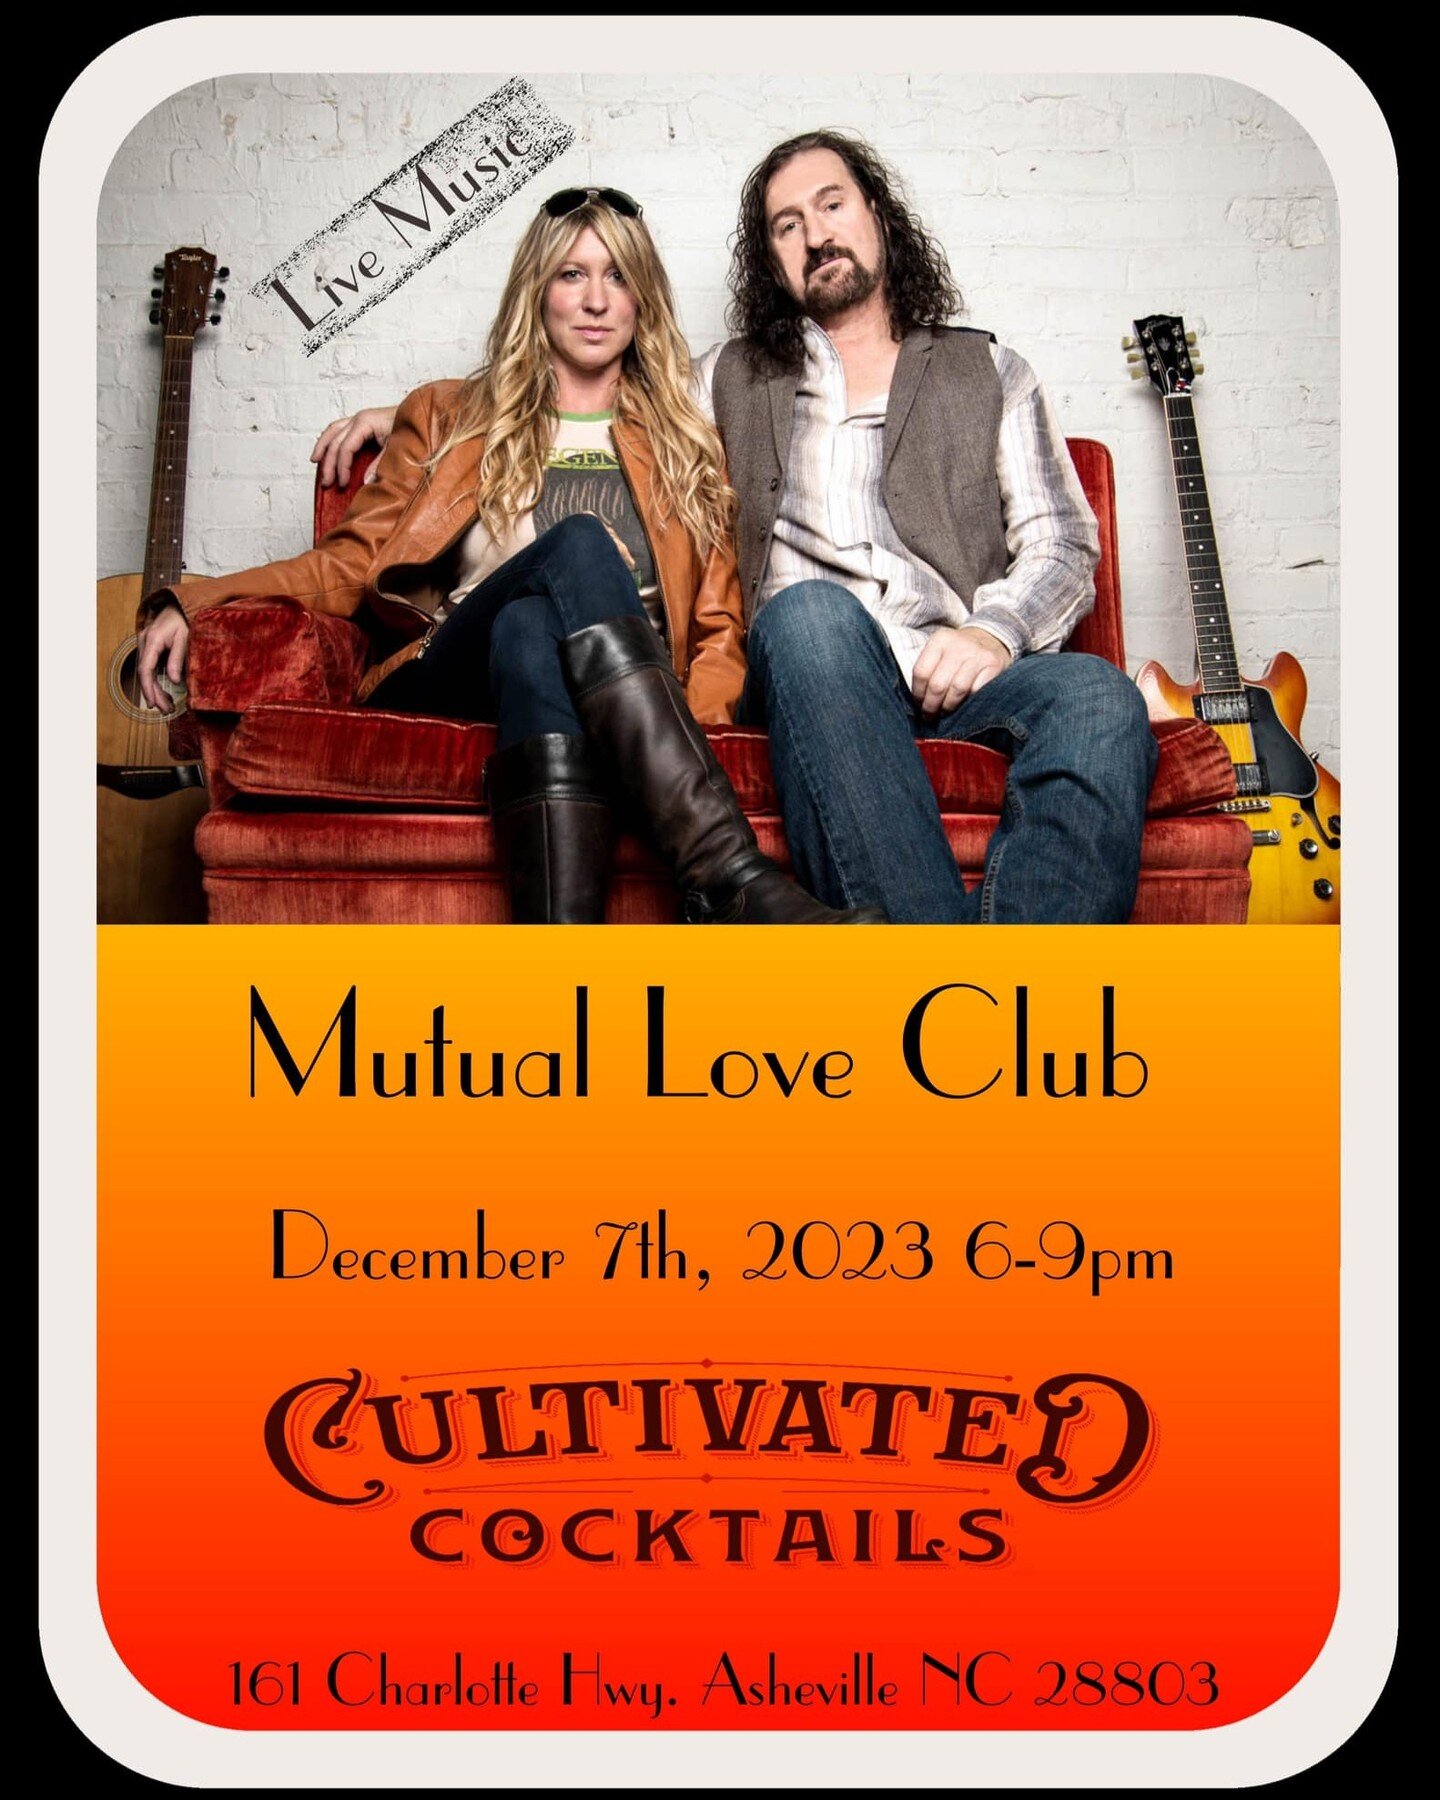 Tonight from 6-9pm at @cultivatedcocktailsdistillery on Charlotte Hwy, Asheville! Come join us!